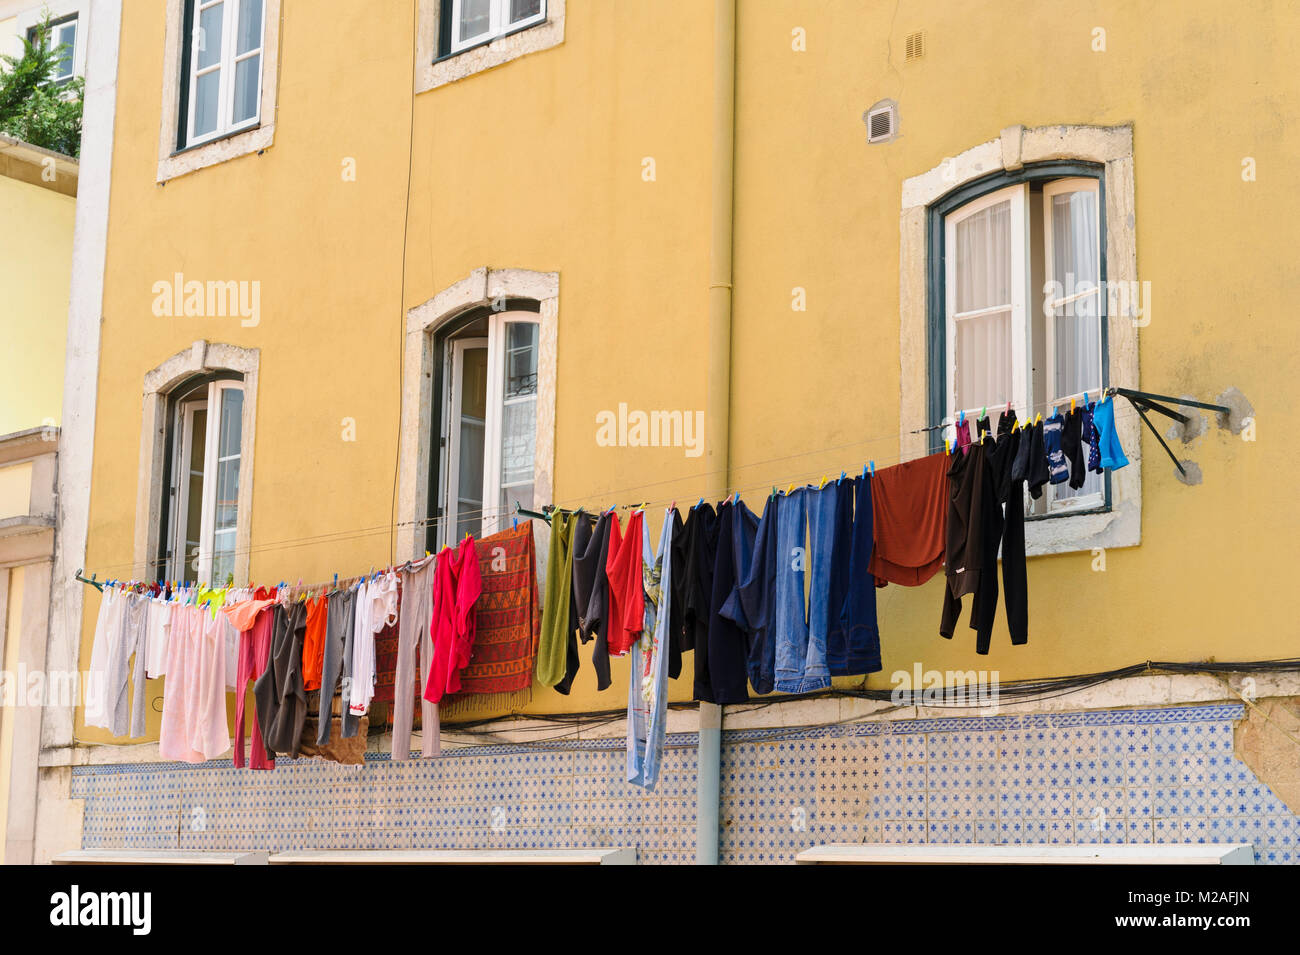 Clothes drying on washing line, Lisbon, Portugal Stock Photo